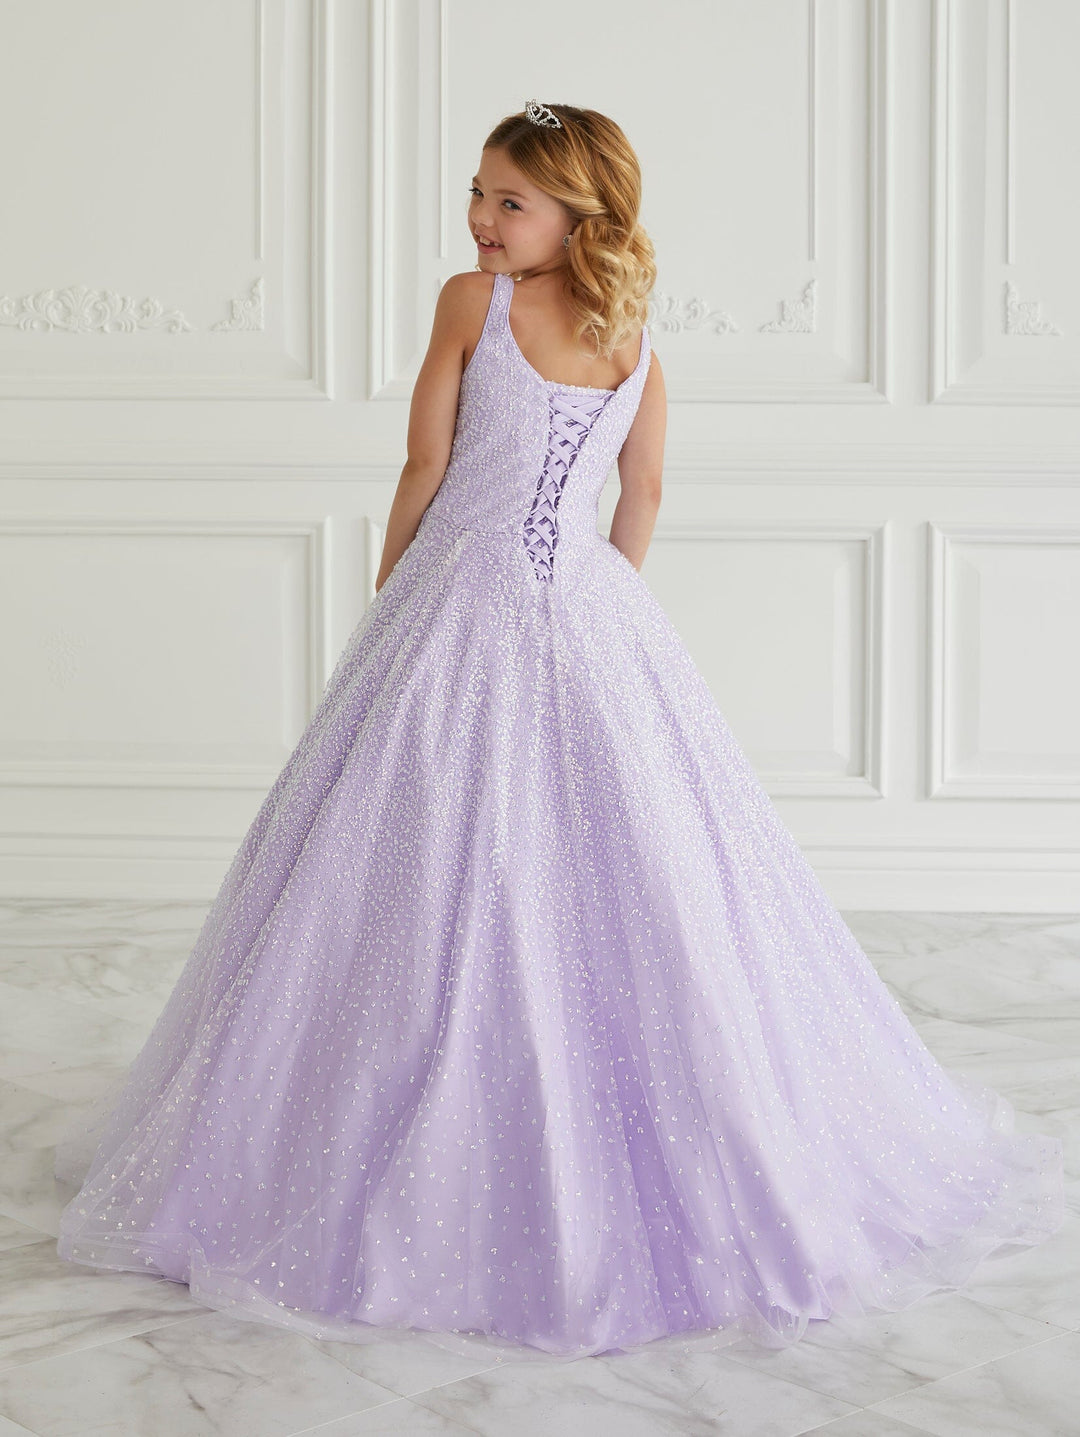 Girls Glitter Cape Sleeve Gown by Tiffany Princess 13656